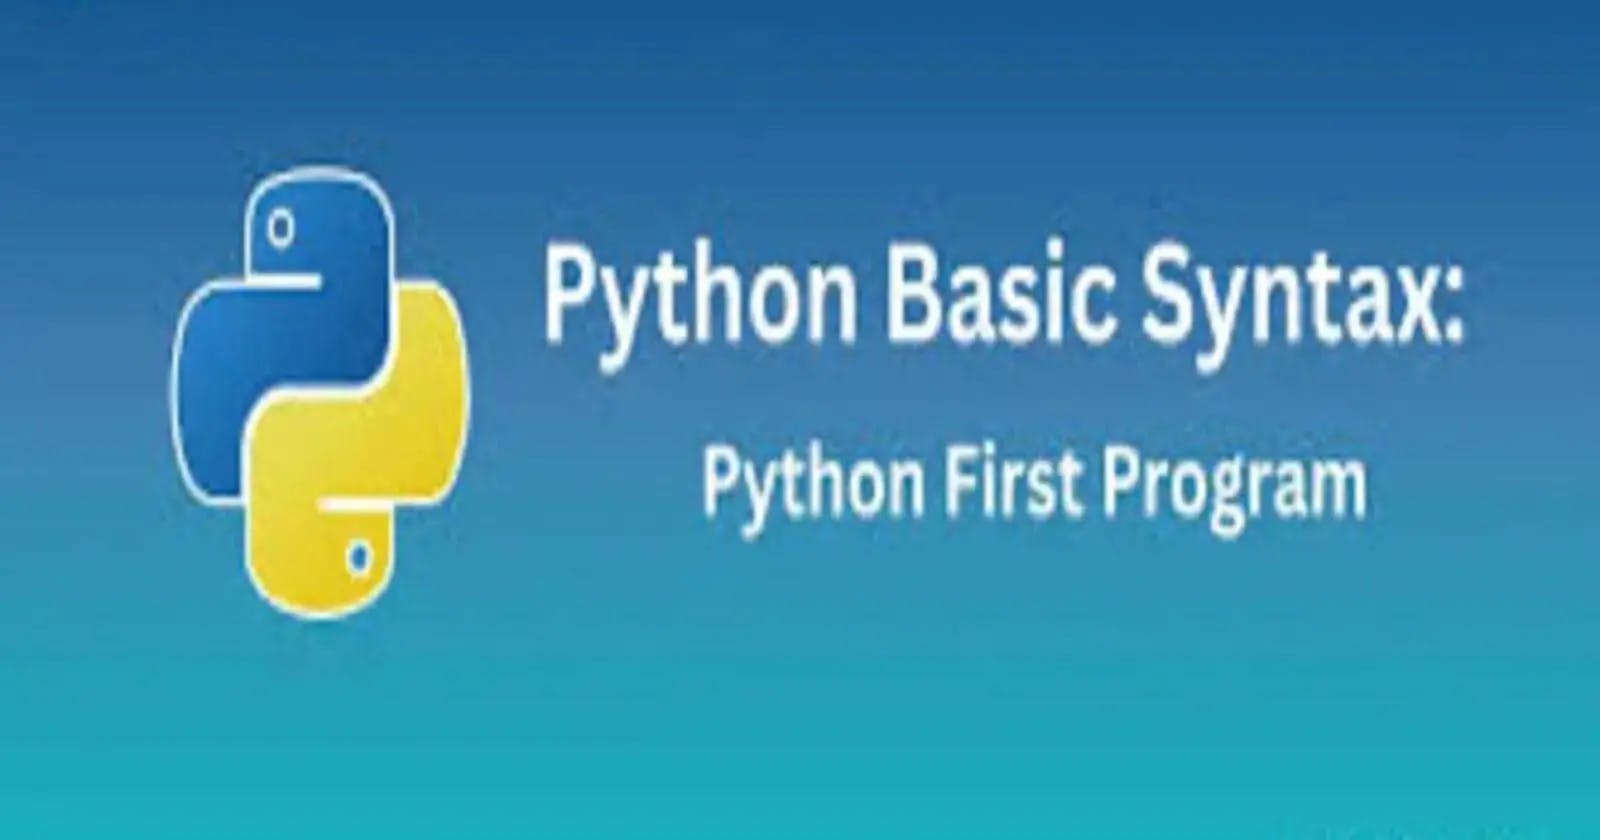 A Beginner's Guide to Python Syntax